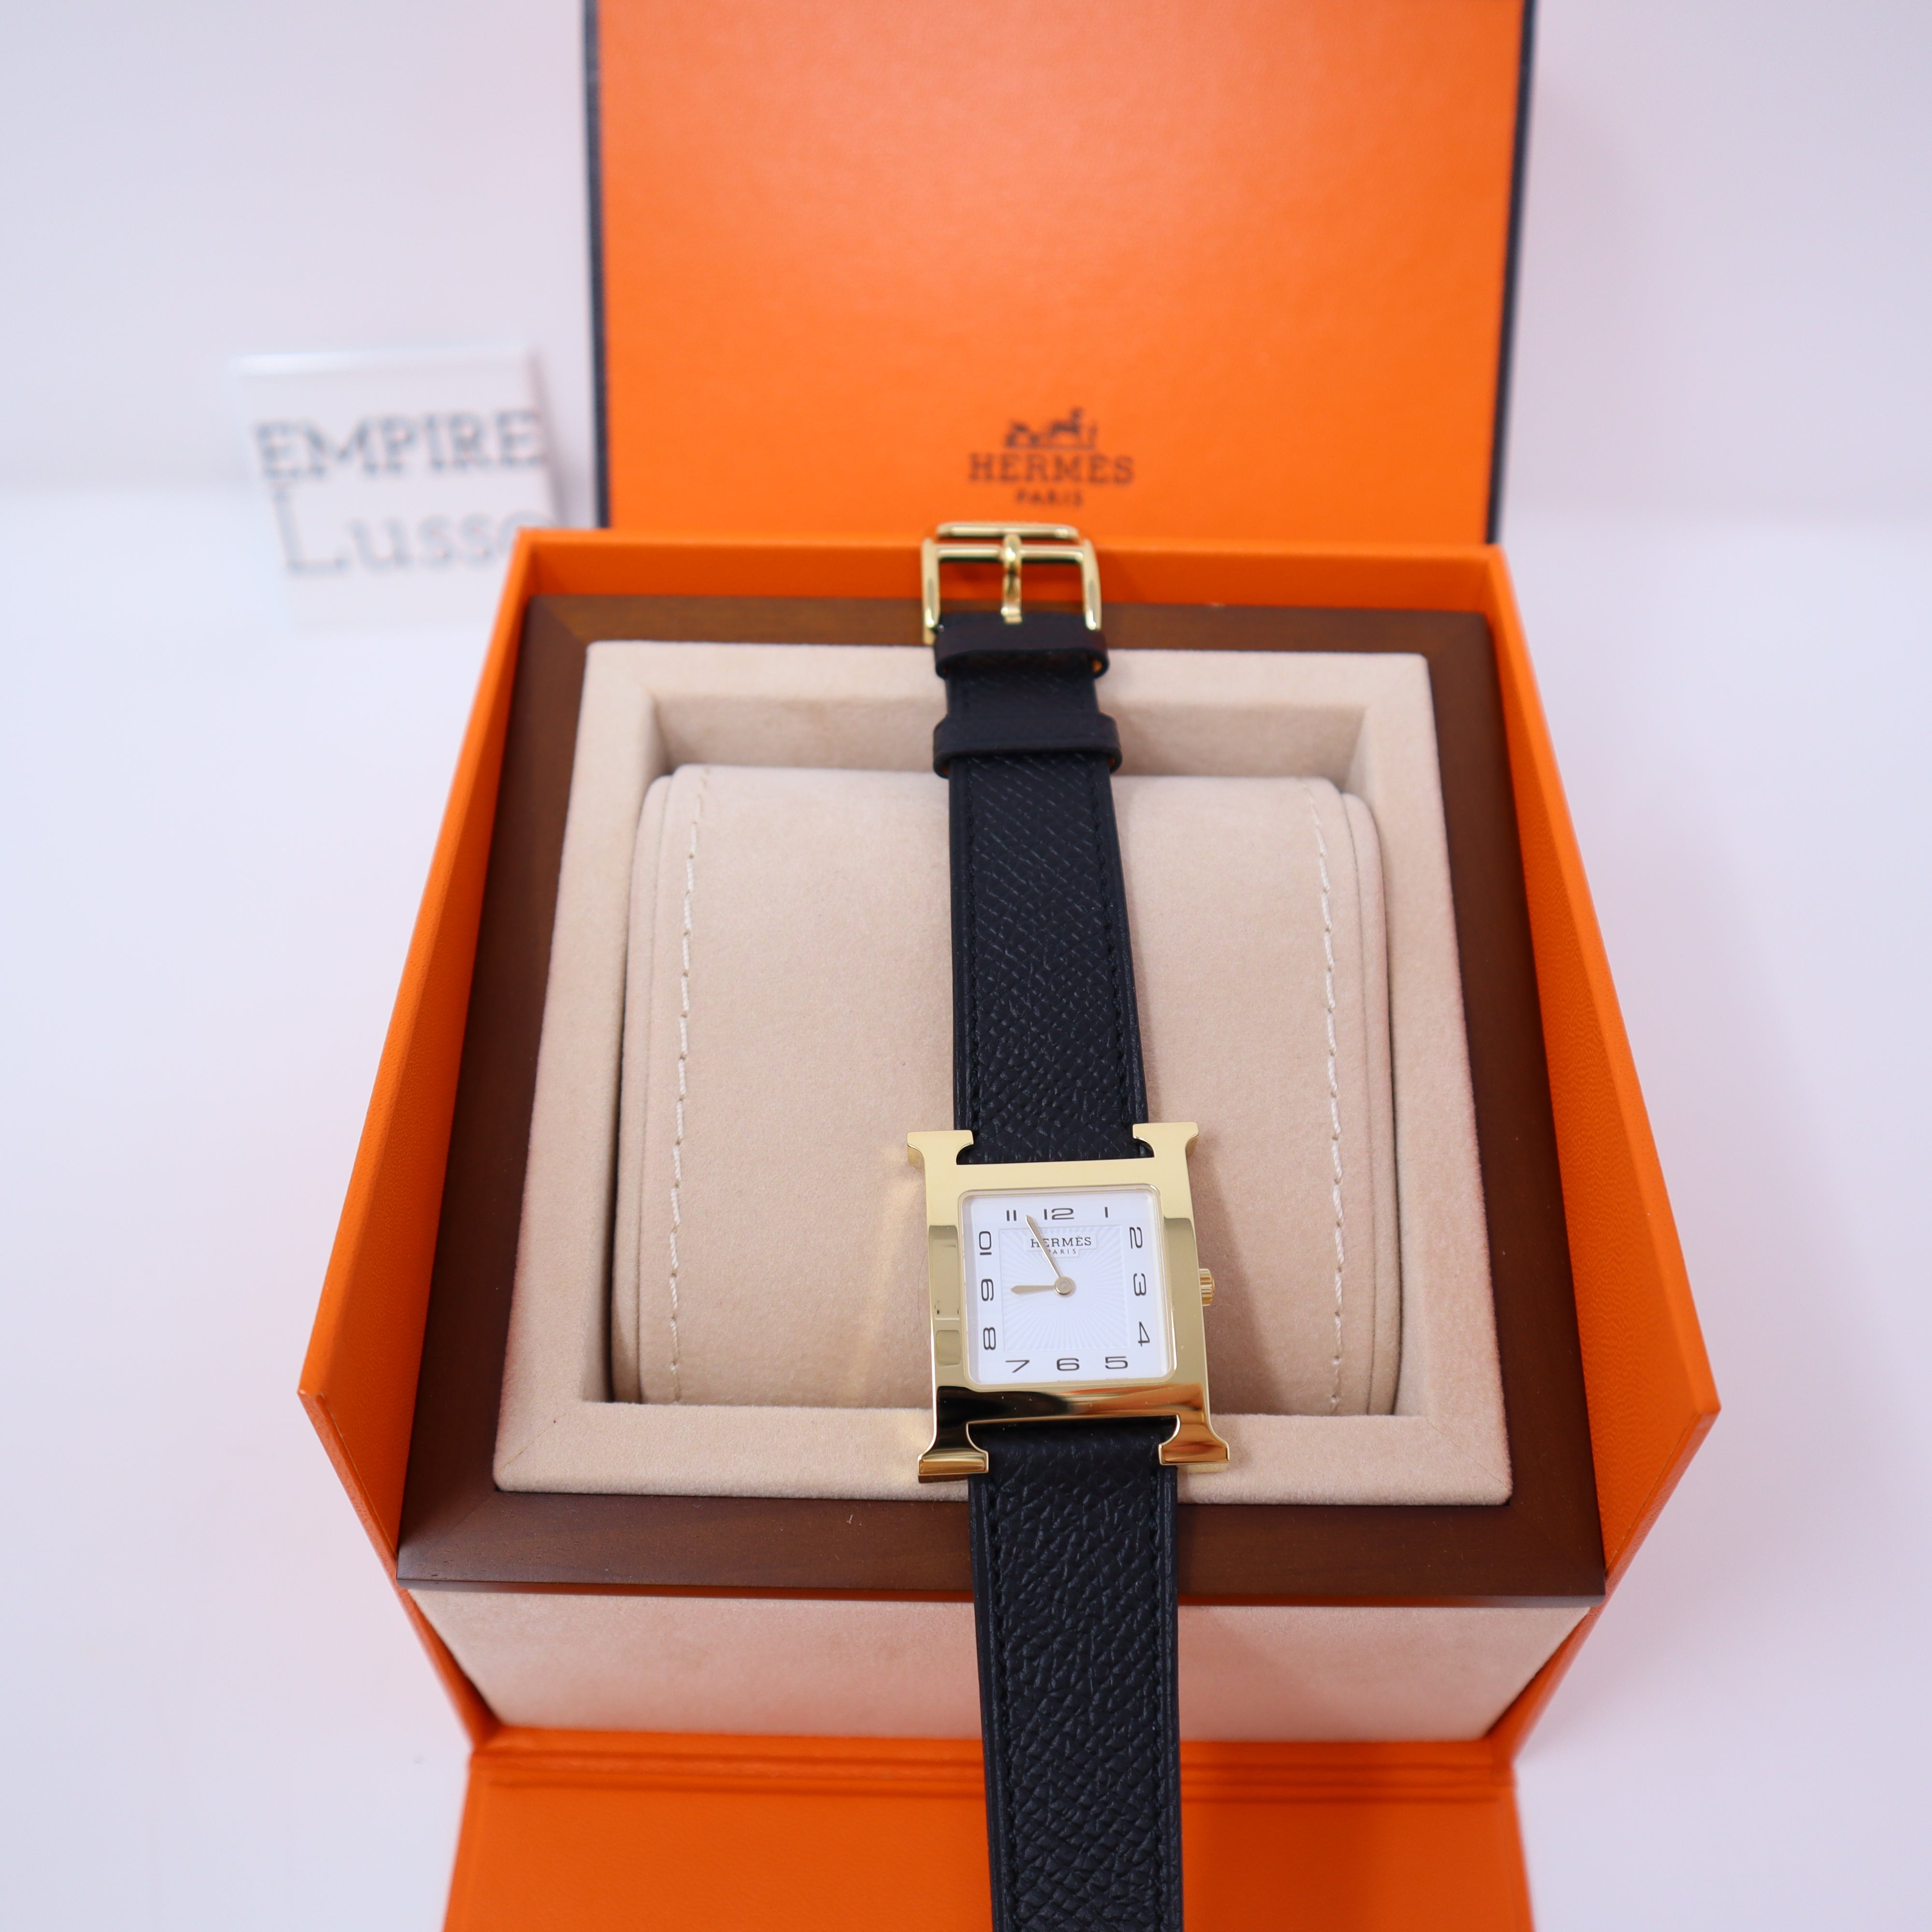 Heure H 26mm White Dial in Yellow Gold on Black Epsom Leather